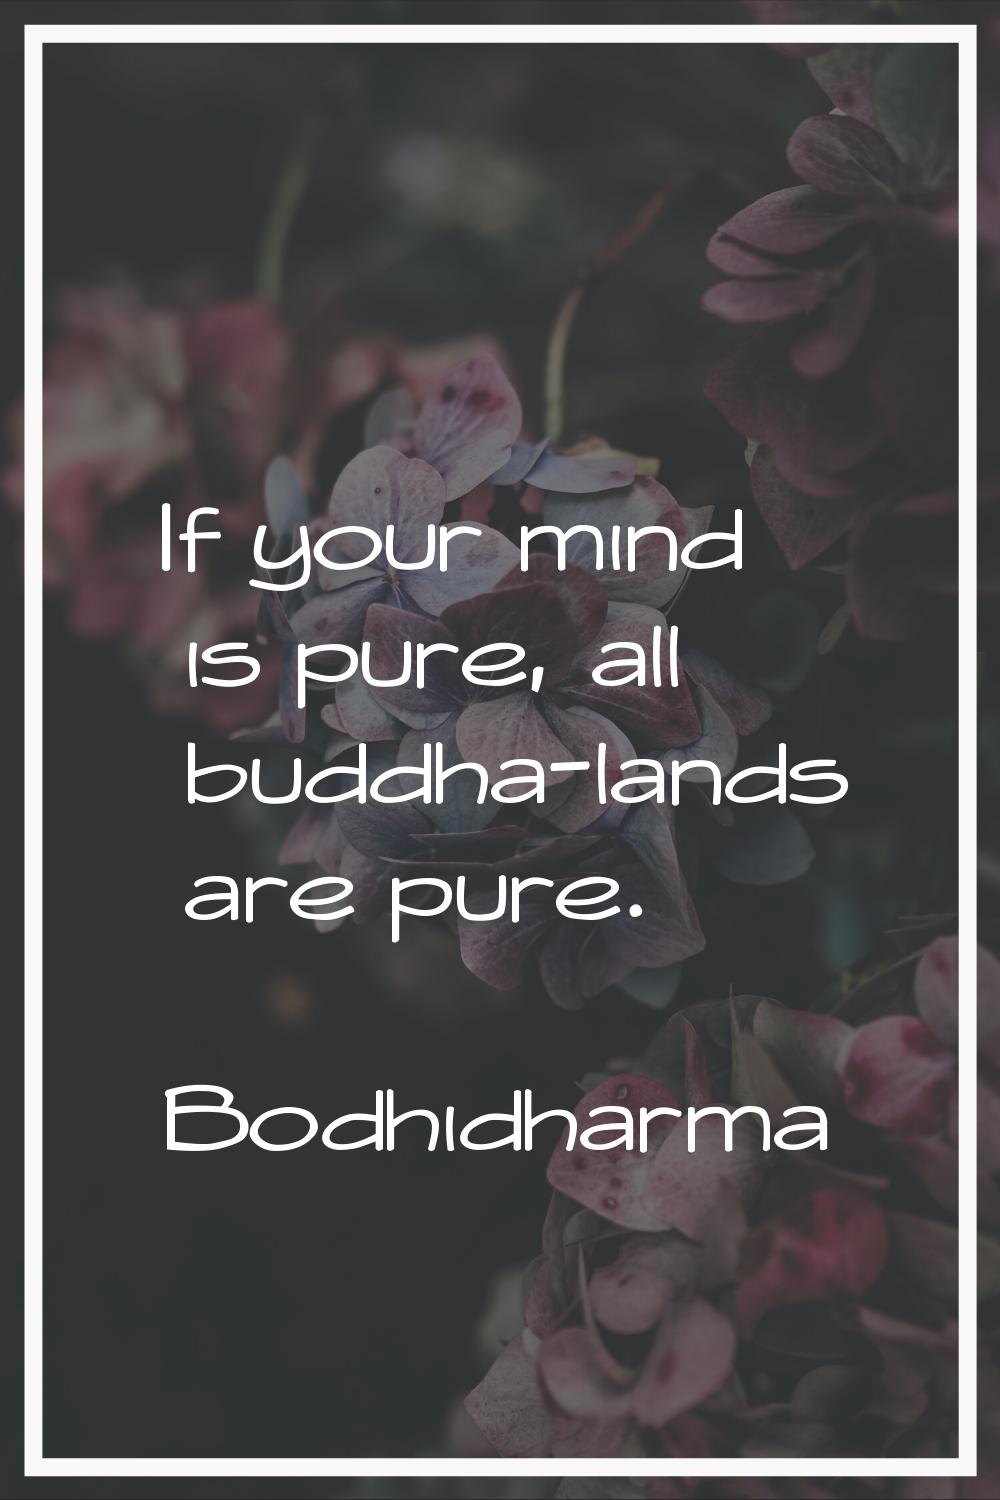 If your mind is pure, all buddha-lands are pure.